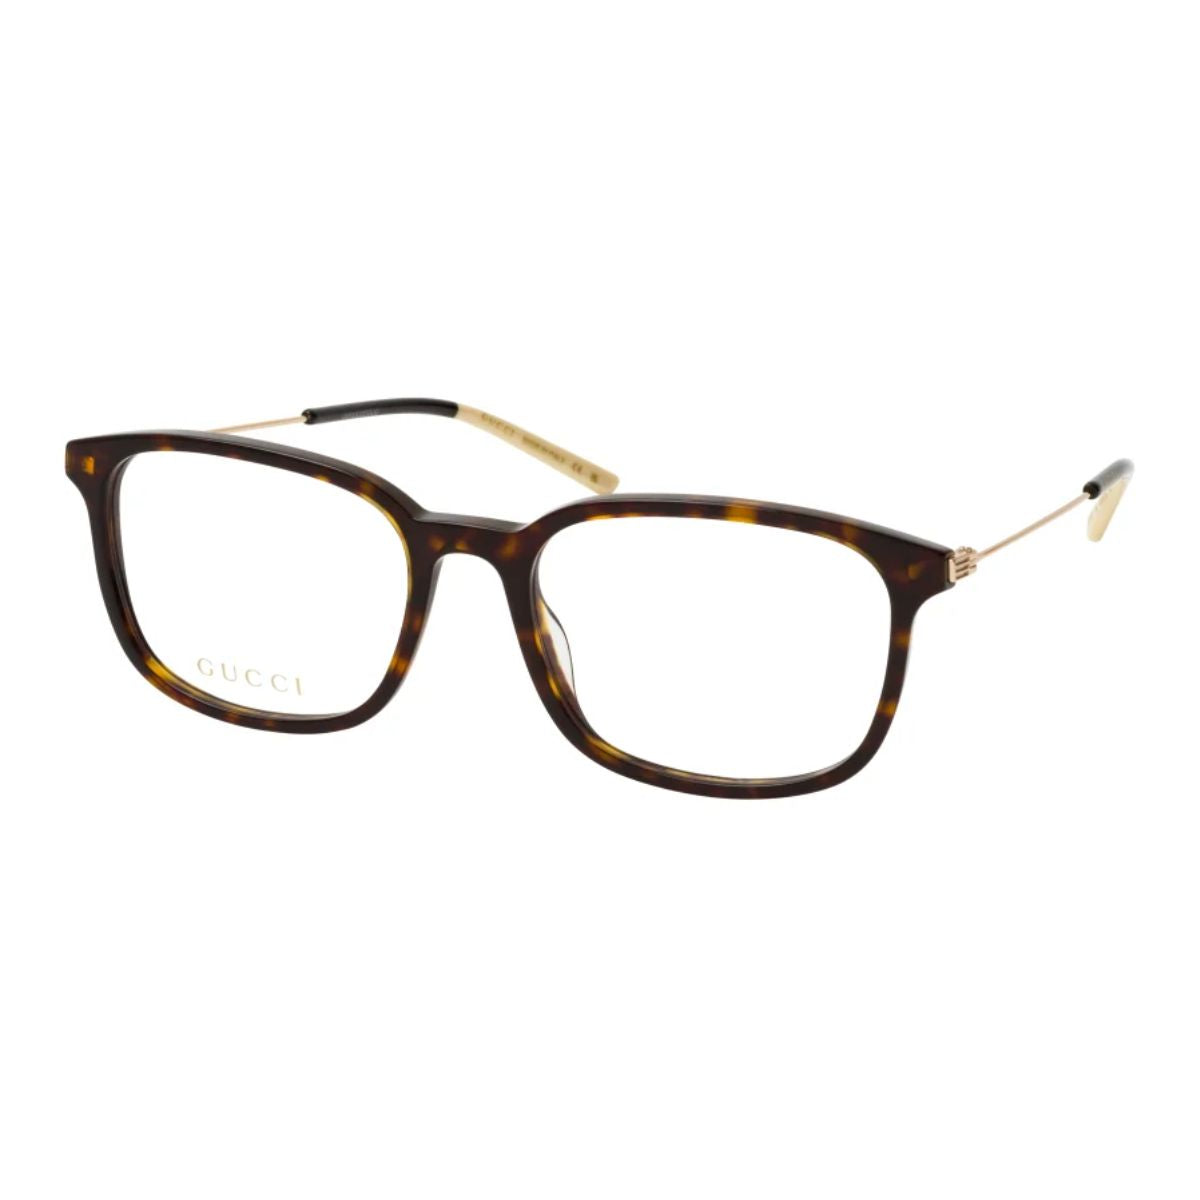 "Premium Gucci Eyewear - Model 1577O 006 frames offering sophistication and style for both genders."